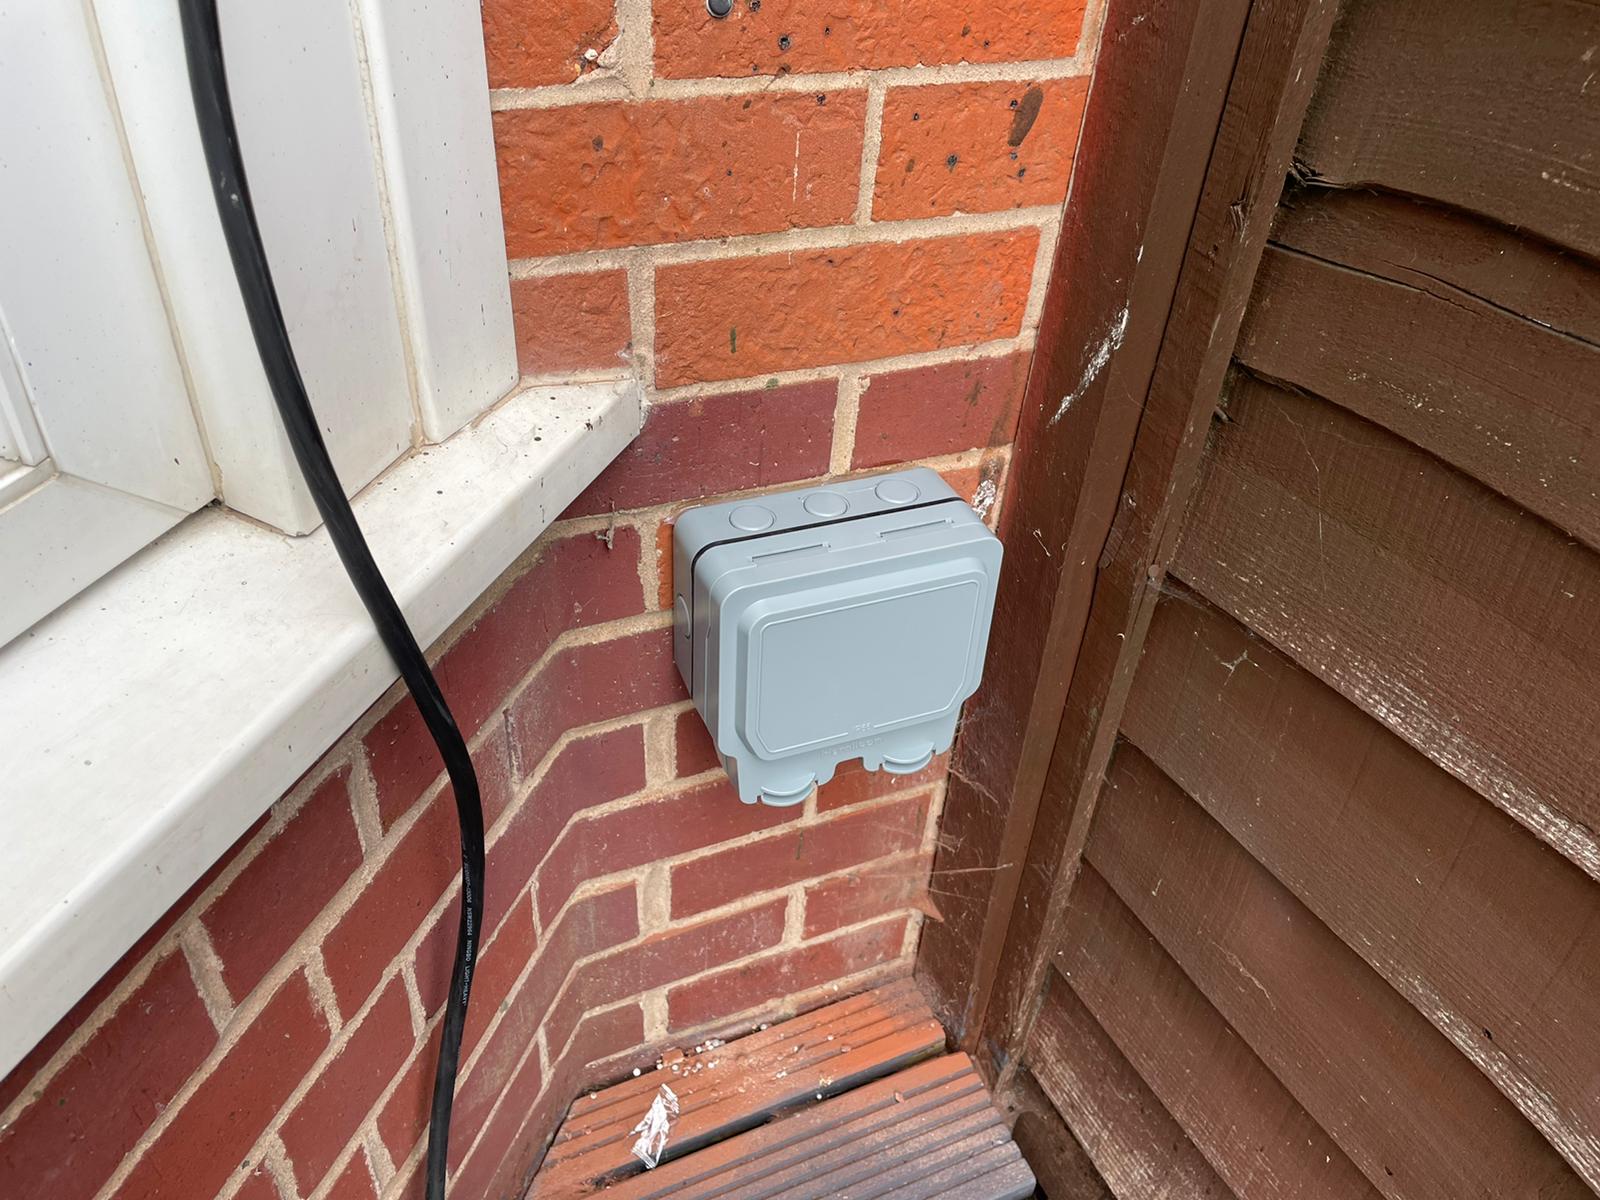 Weatherproof double socket installed in Hilton to power a 13amp hot tub, it is a double gray sized socket on a wall